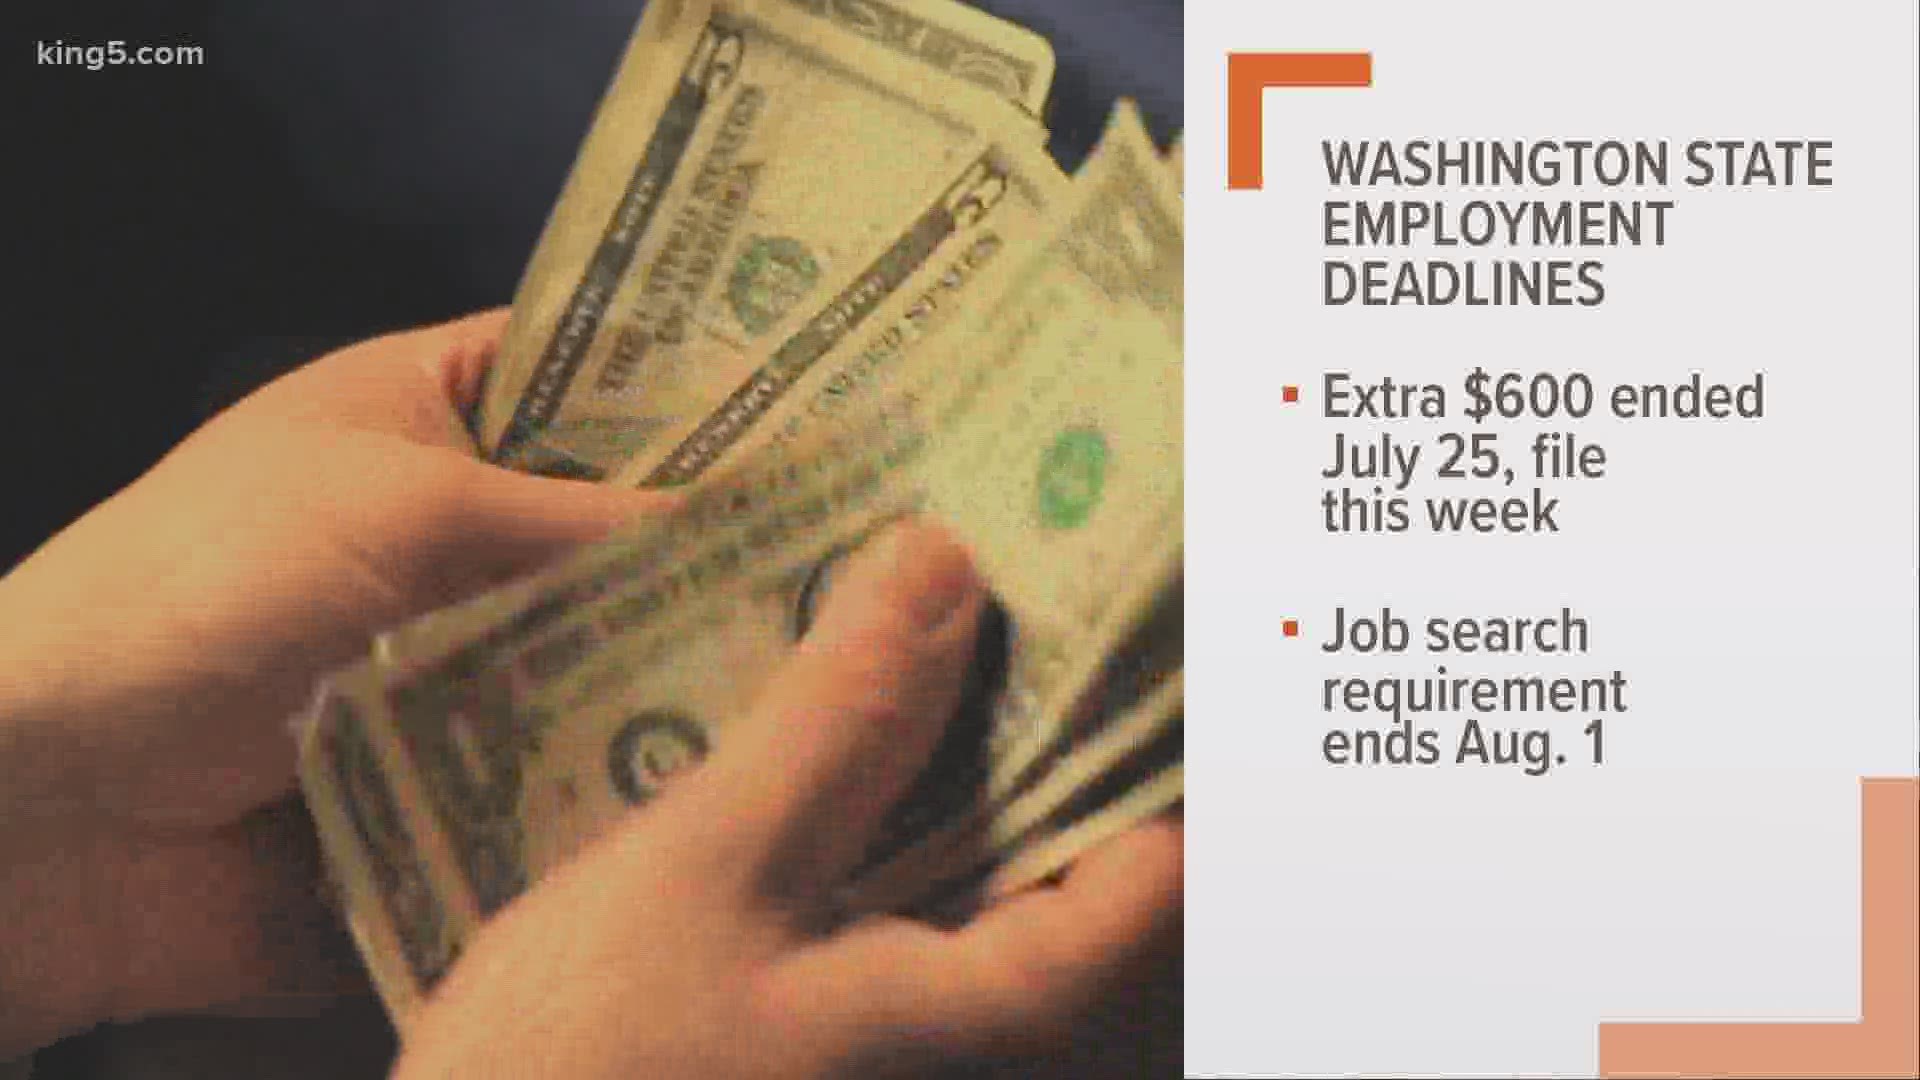 Big changes are coming to unemployment benefits in Washington state.